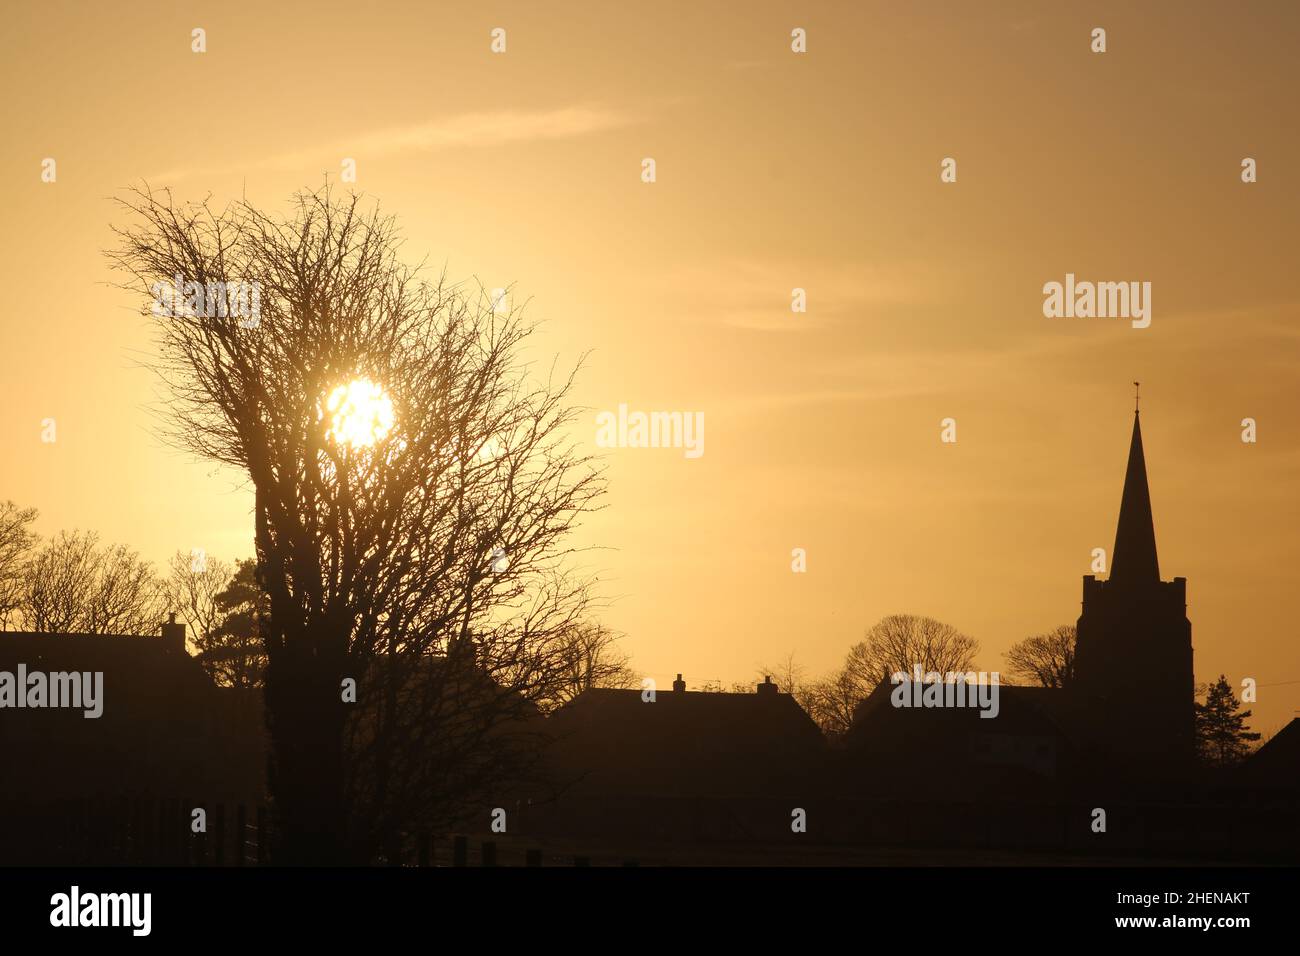 Silhouettes of houses and St John the Baptist C. of E. church in Pilling, Preston, Lancashire, England at sunset with the sun behind bare tree. Stock Photo